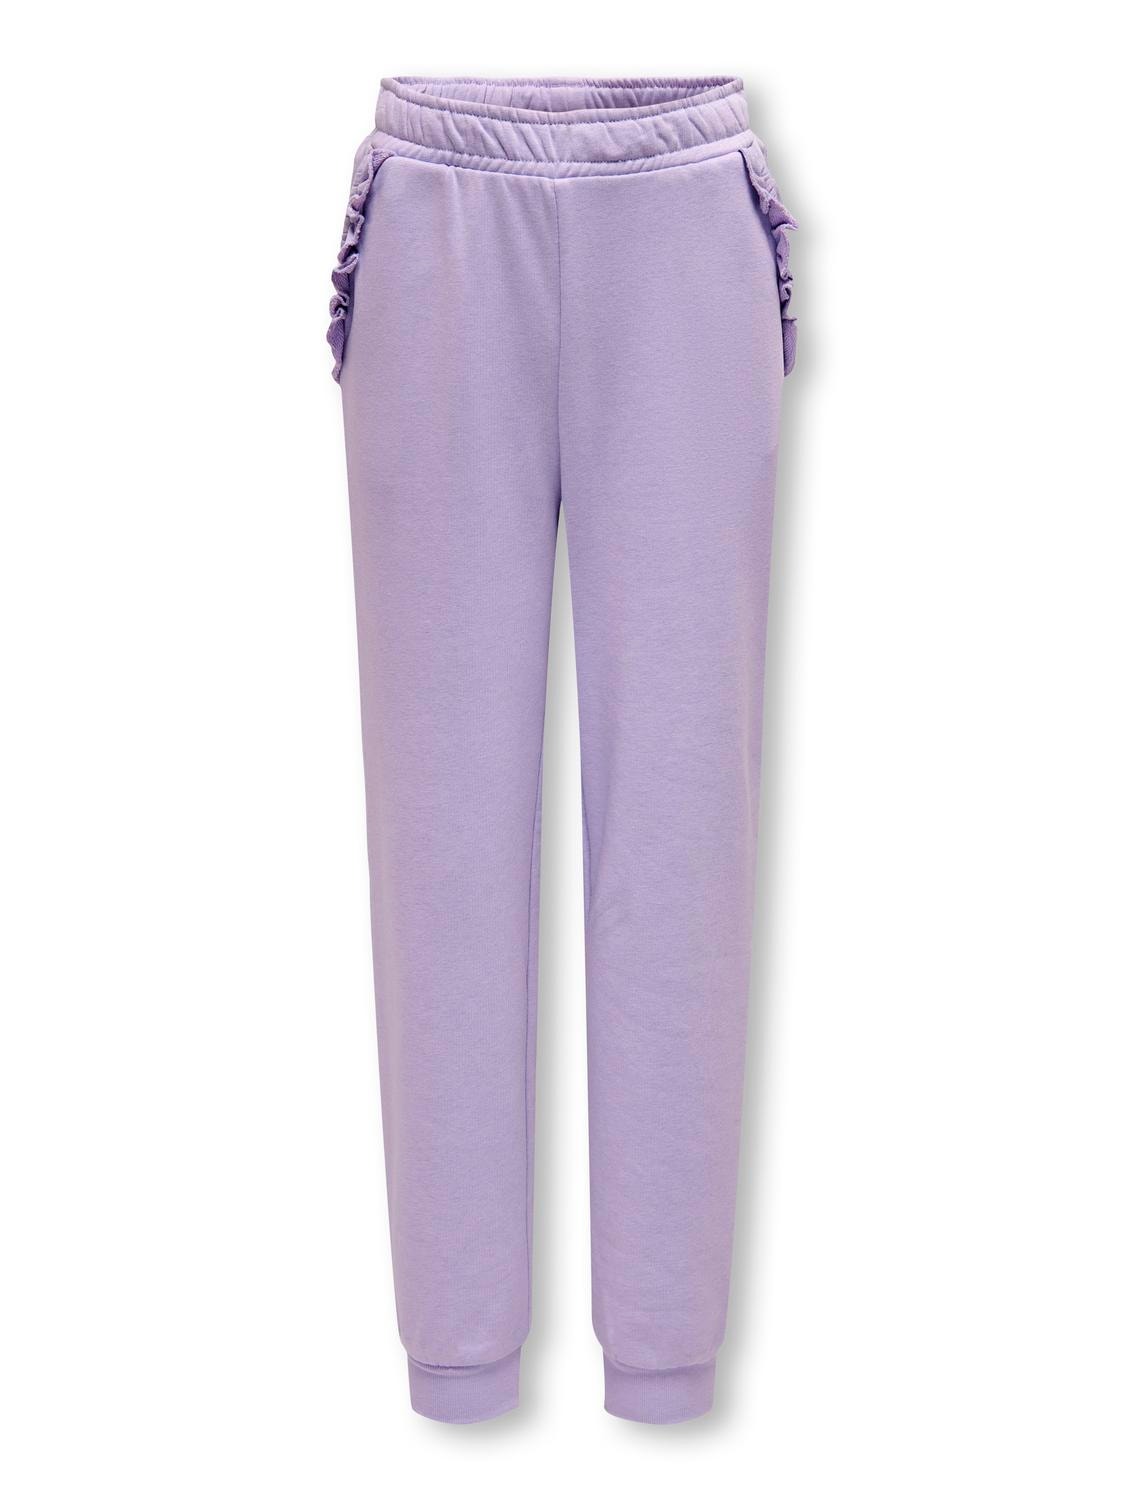 ONLY Sweatpants With Frills -Purple Rose - 15281471